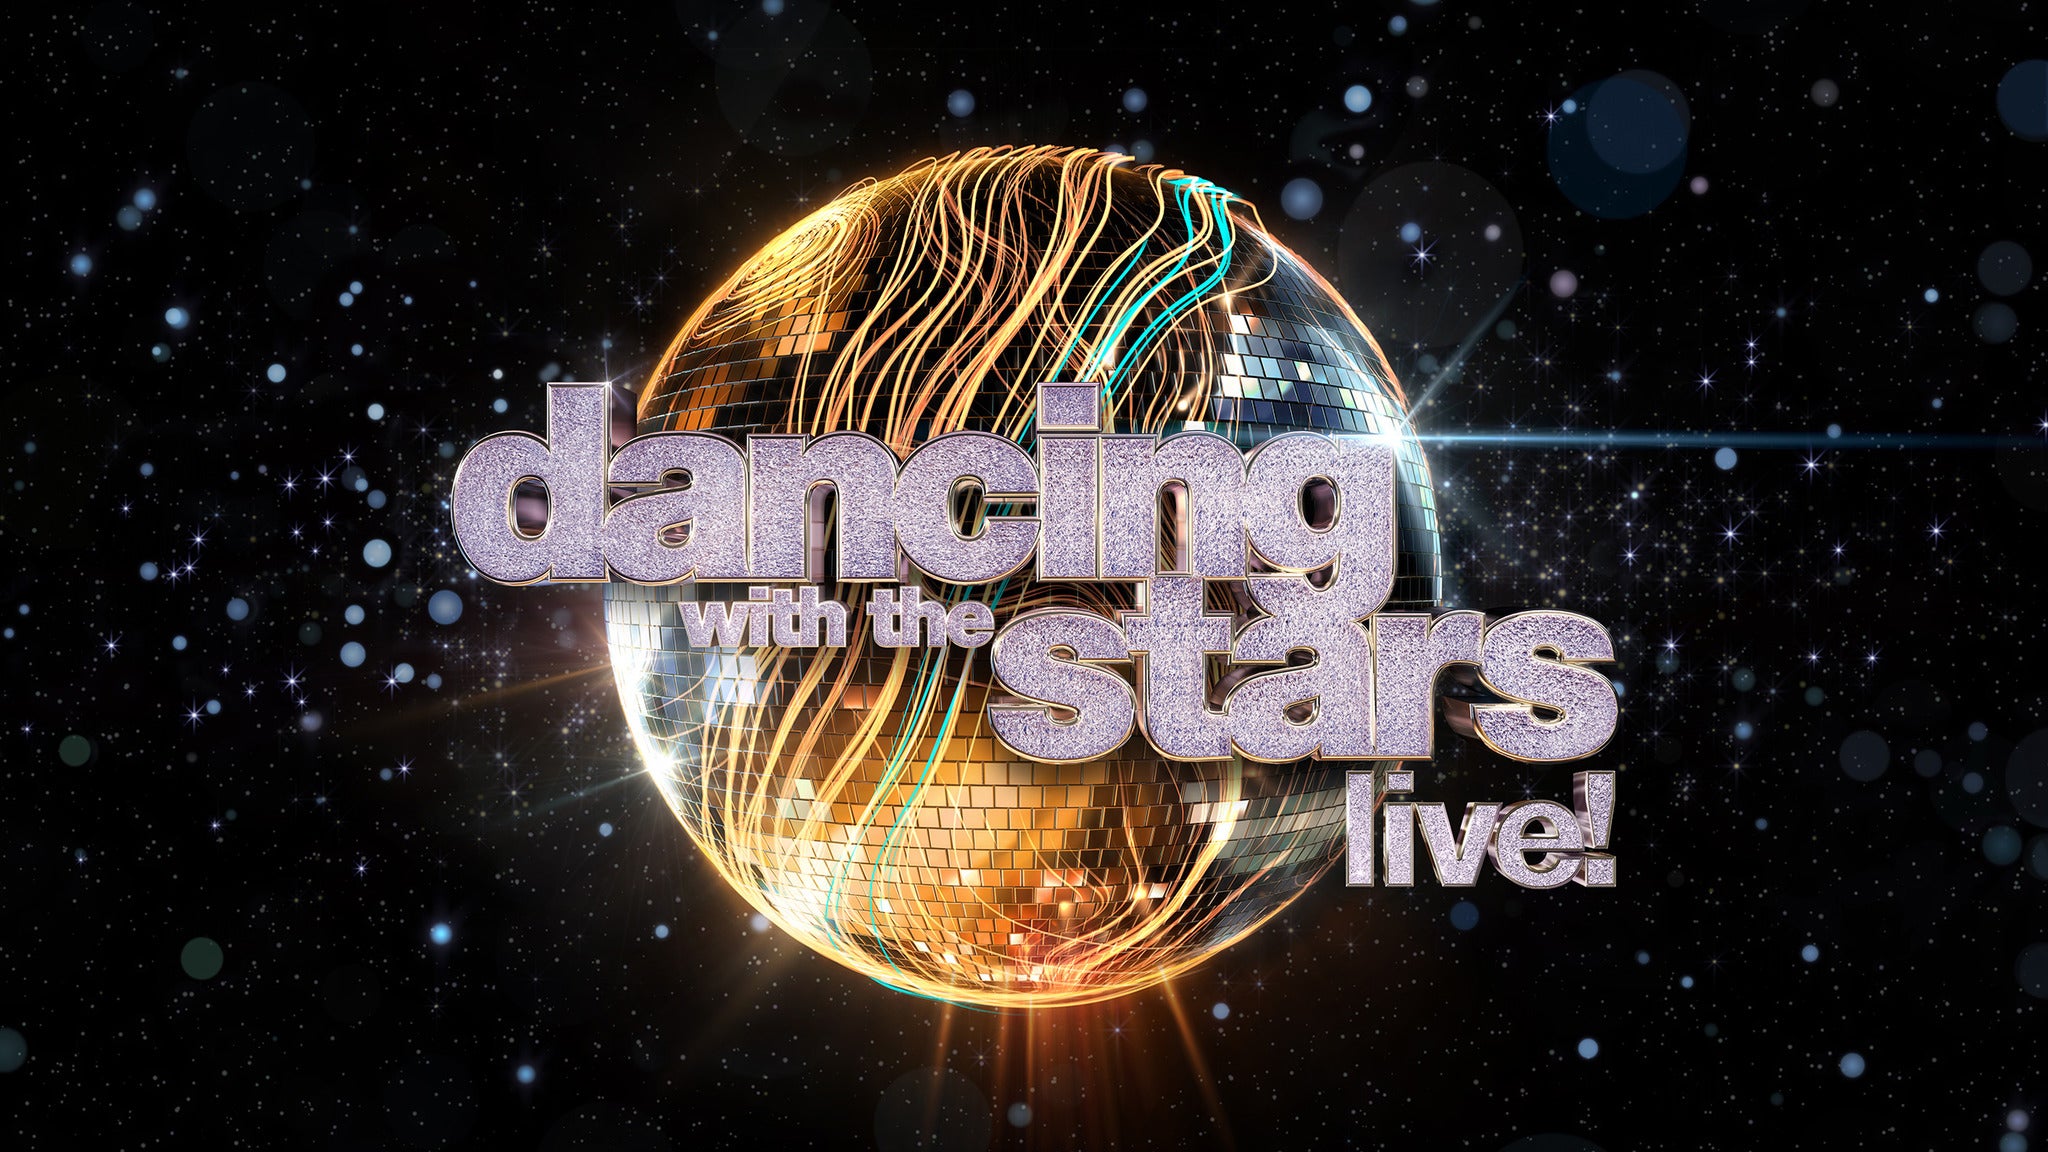 Dancing With The Stars: Live! - Light Up The Night in Nashville promo photo for American Express presale offer code